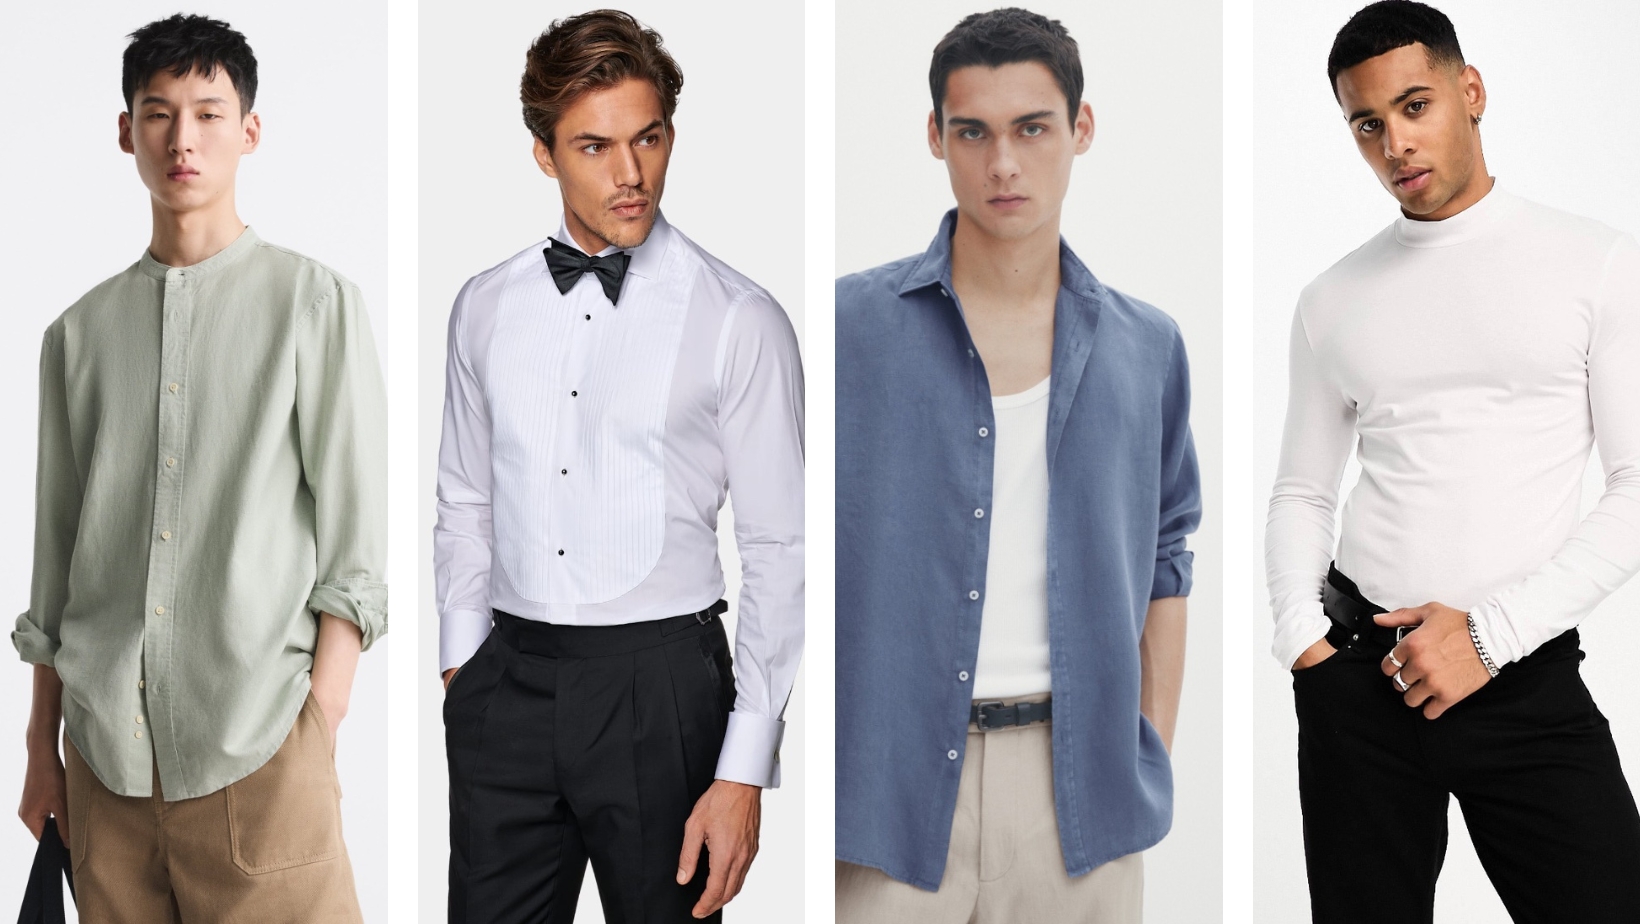 Ammara: The New NYC Fashion Brand That Specializes in Perfect Shirts